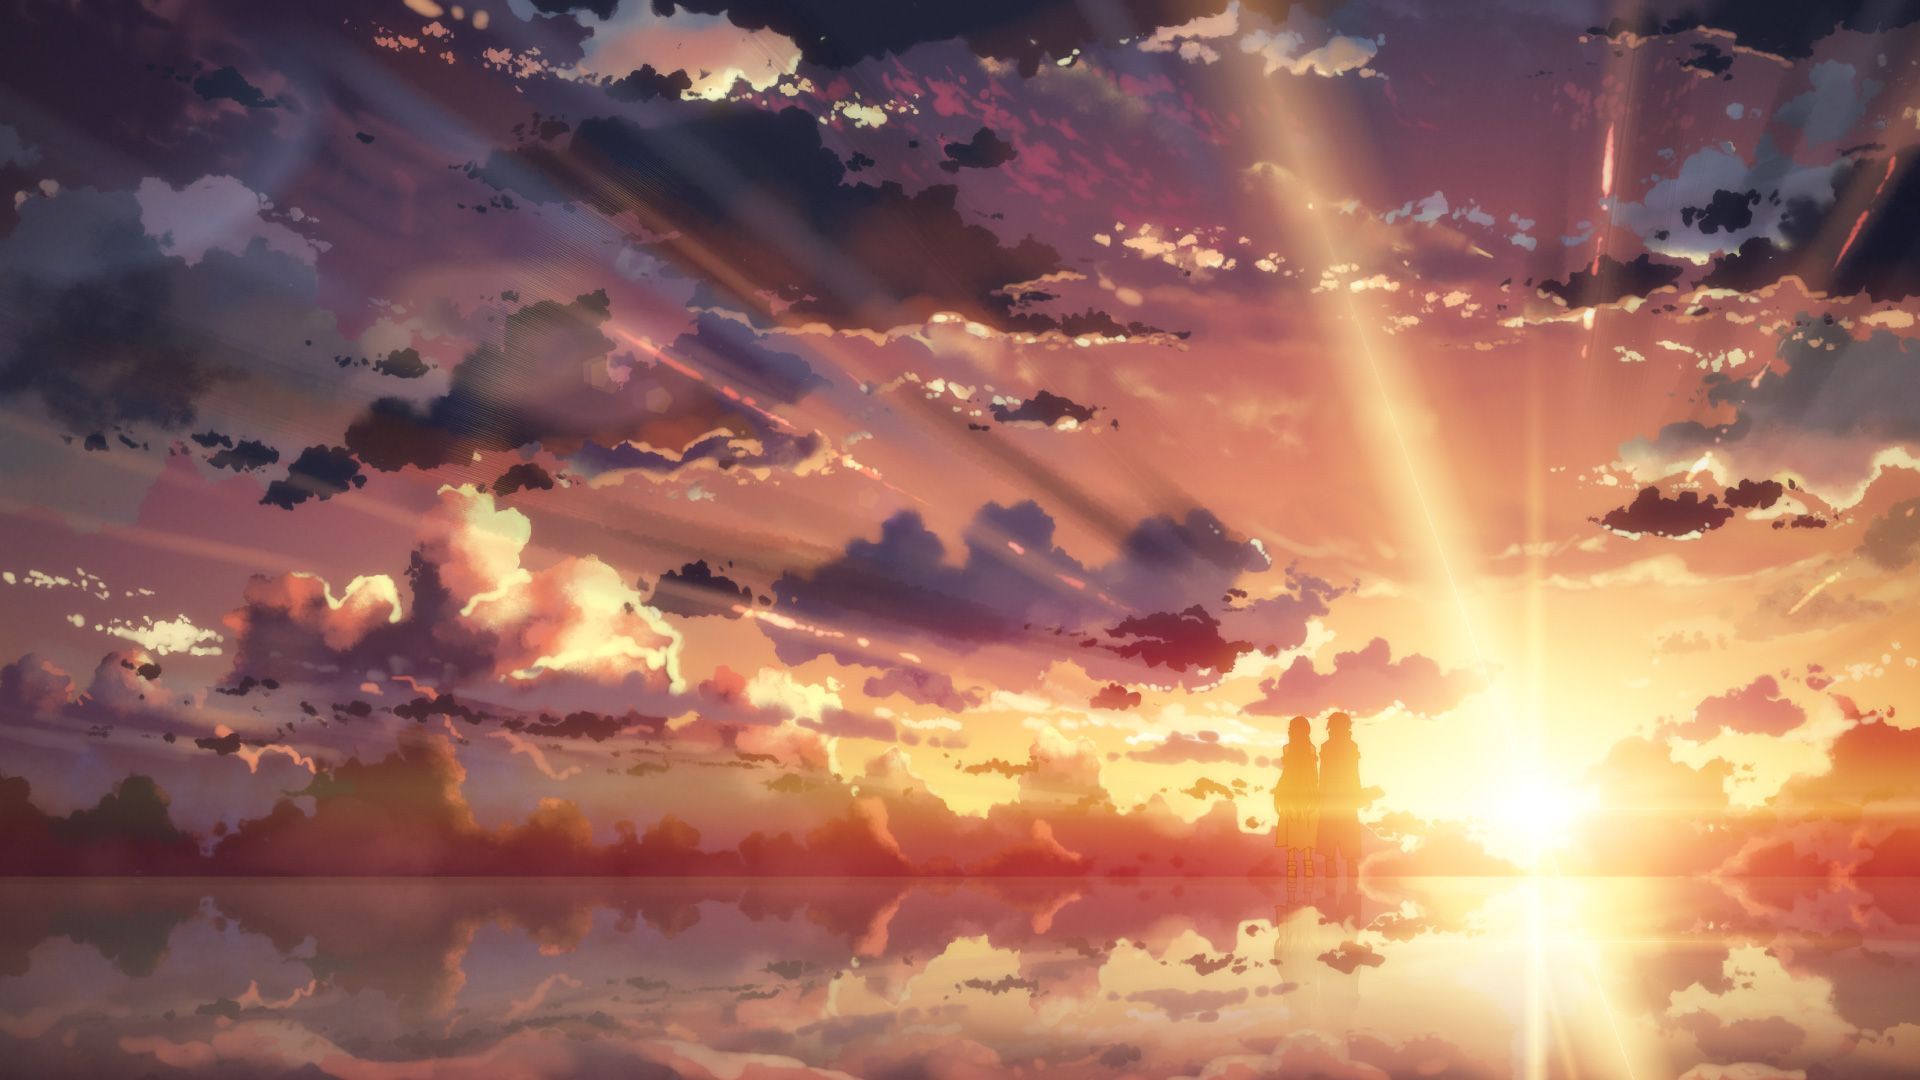 download 1920x1080 wallpaper sunset, road, landscape on anime sunset 1920x1080 wallpapers